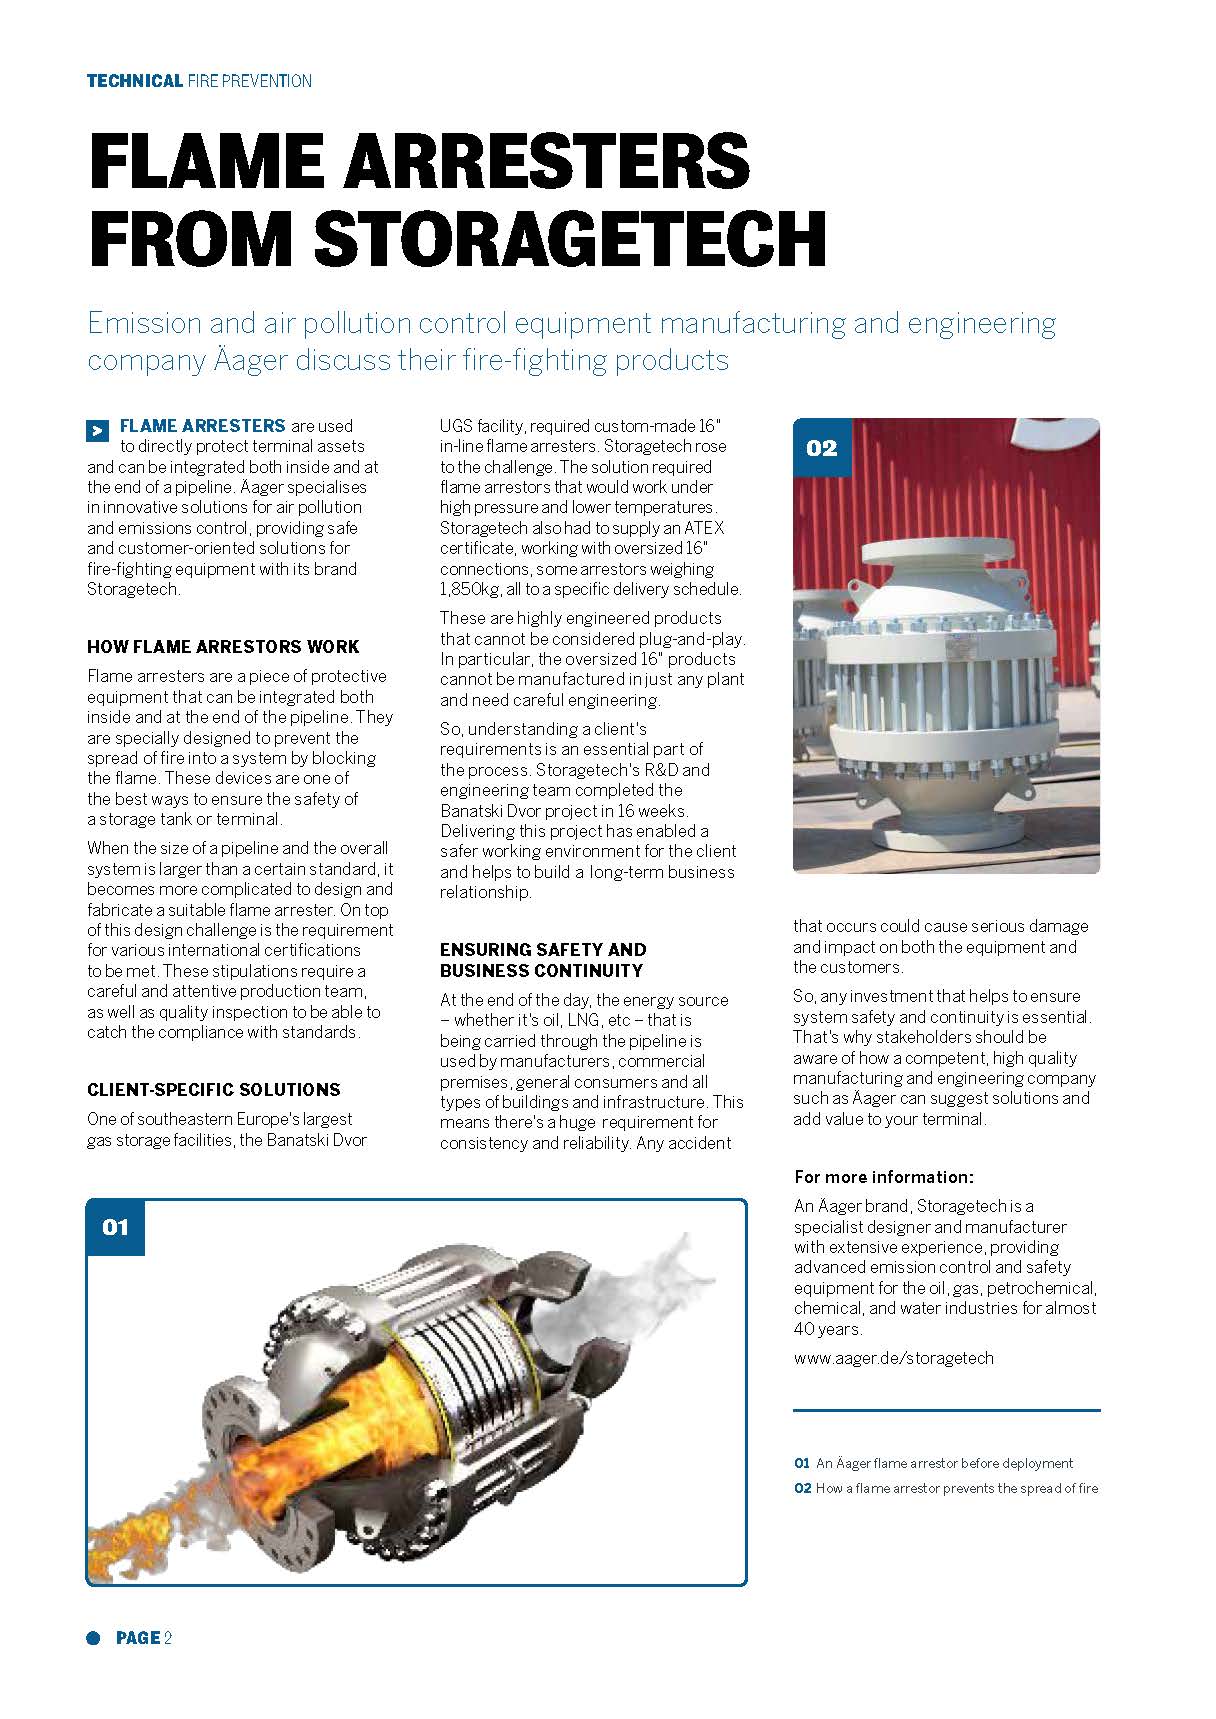 Customer-Oriented Flame Arresters from Storagetech – Tank Storage Magazine Article 17